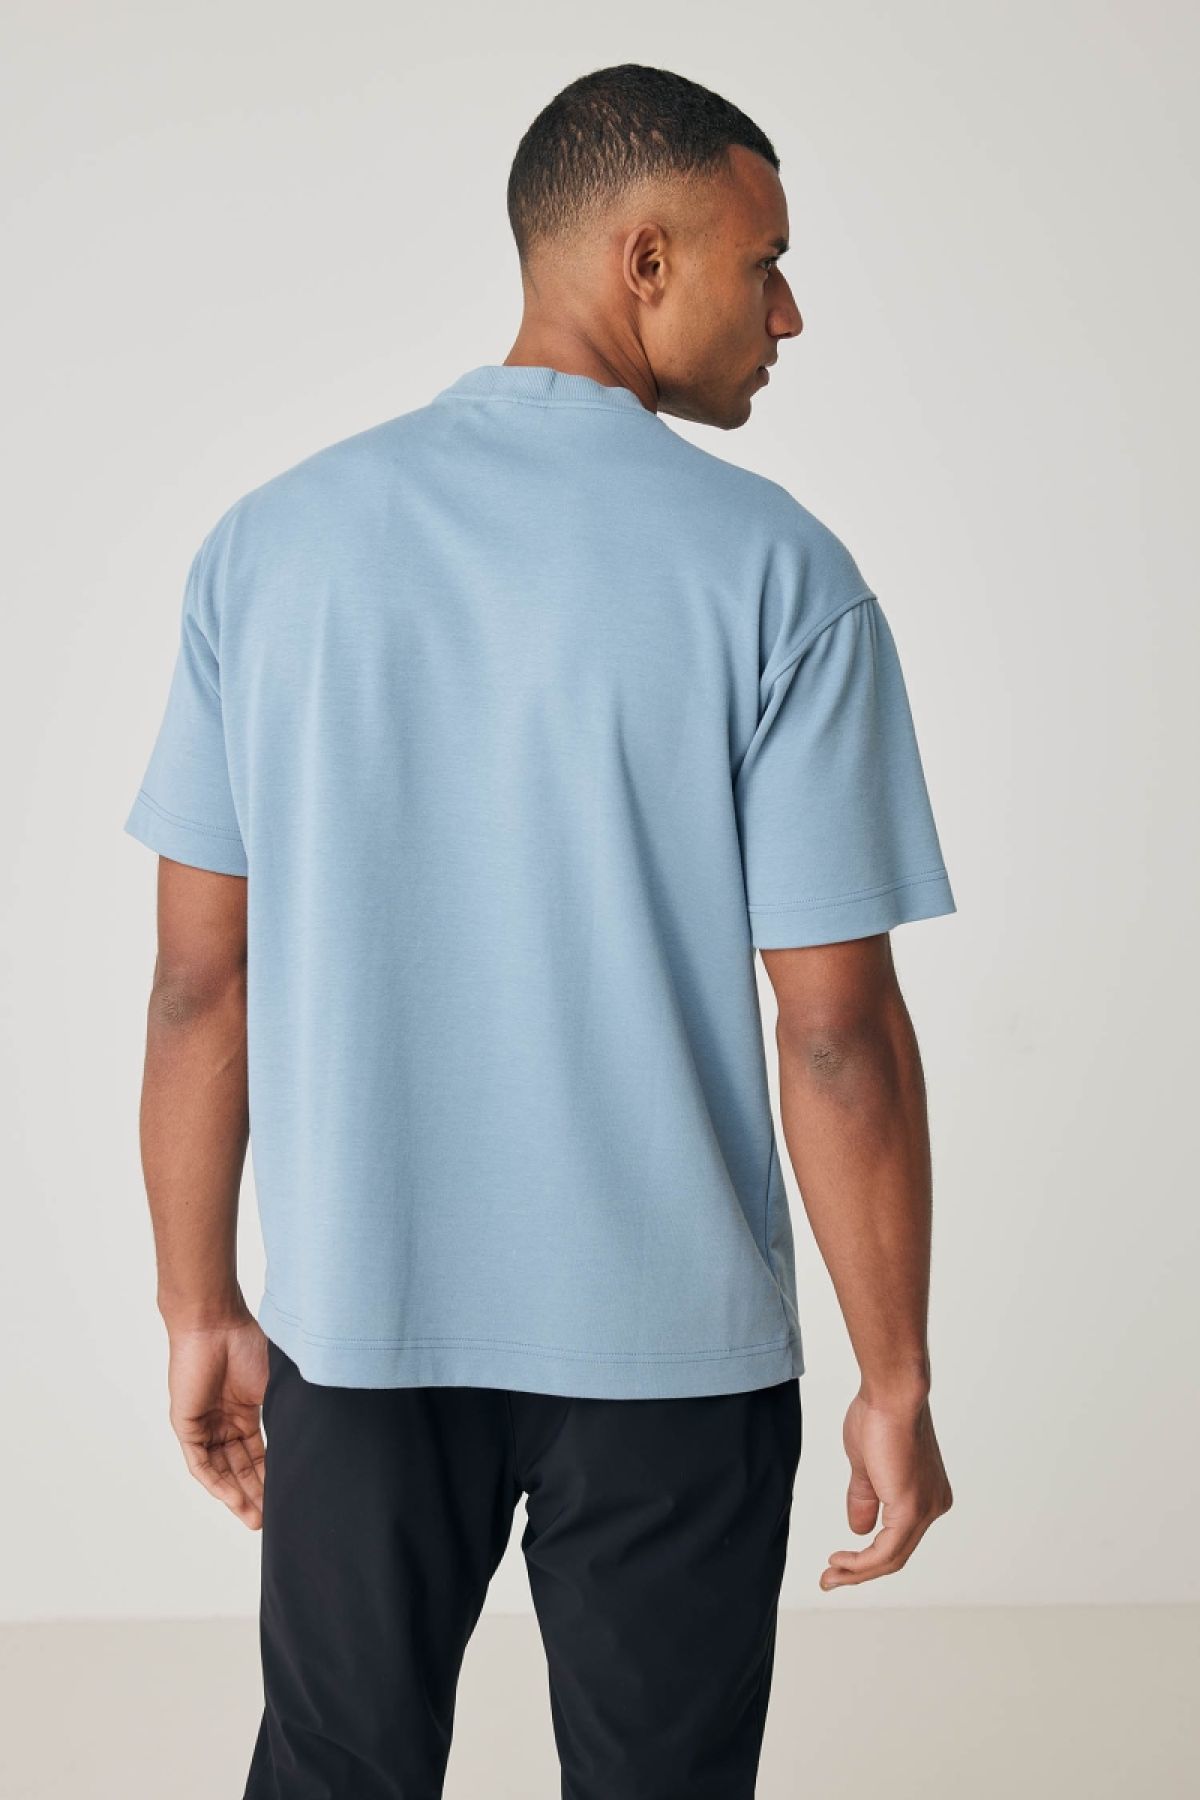 Relaxed fit tee pocket blauw